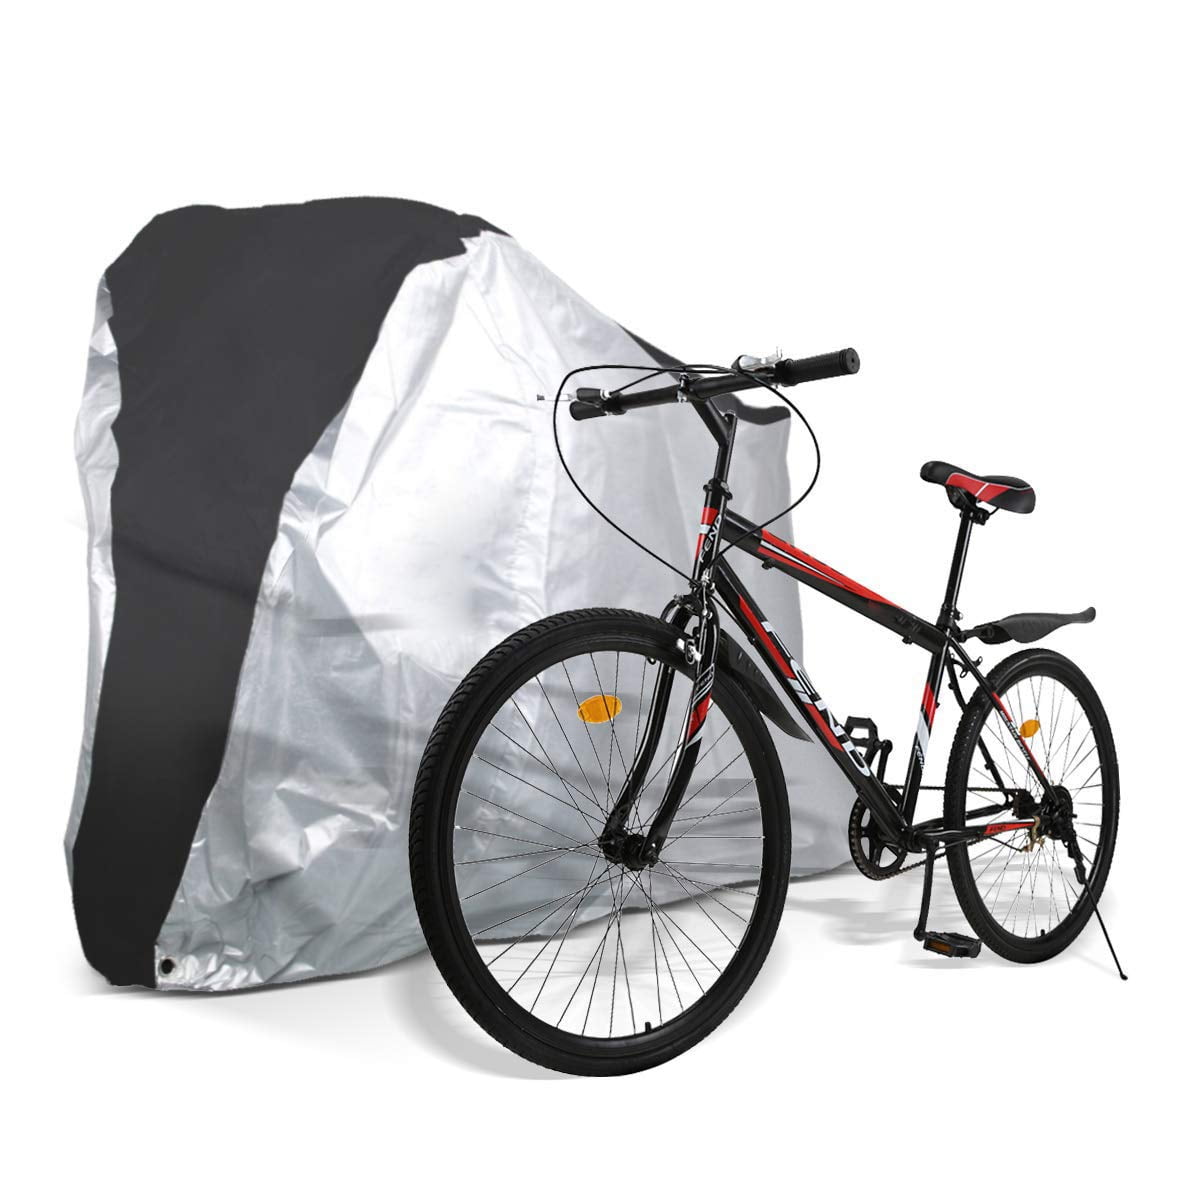 Details about   Single/Double/Triple Bicycle Cover Bike Waterproof Outdoor Dust Black Protector 